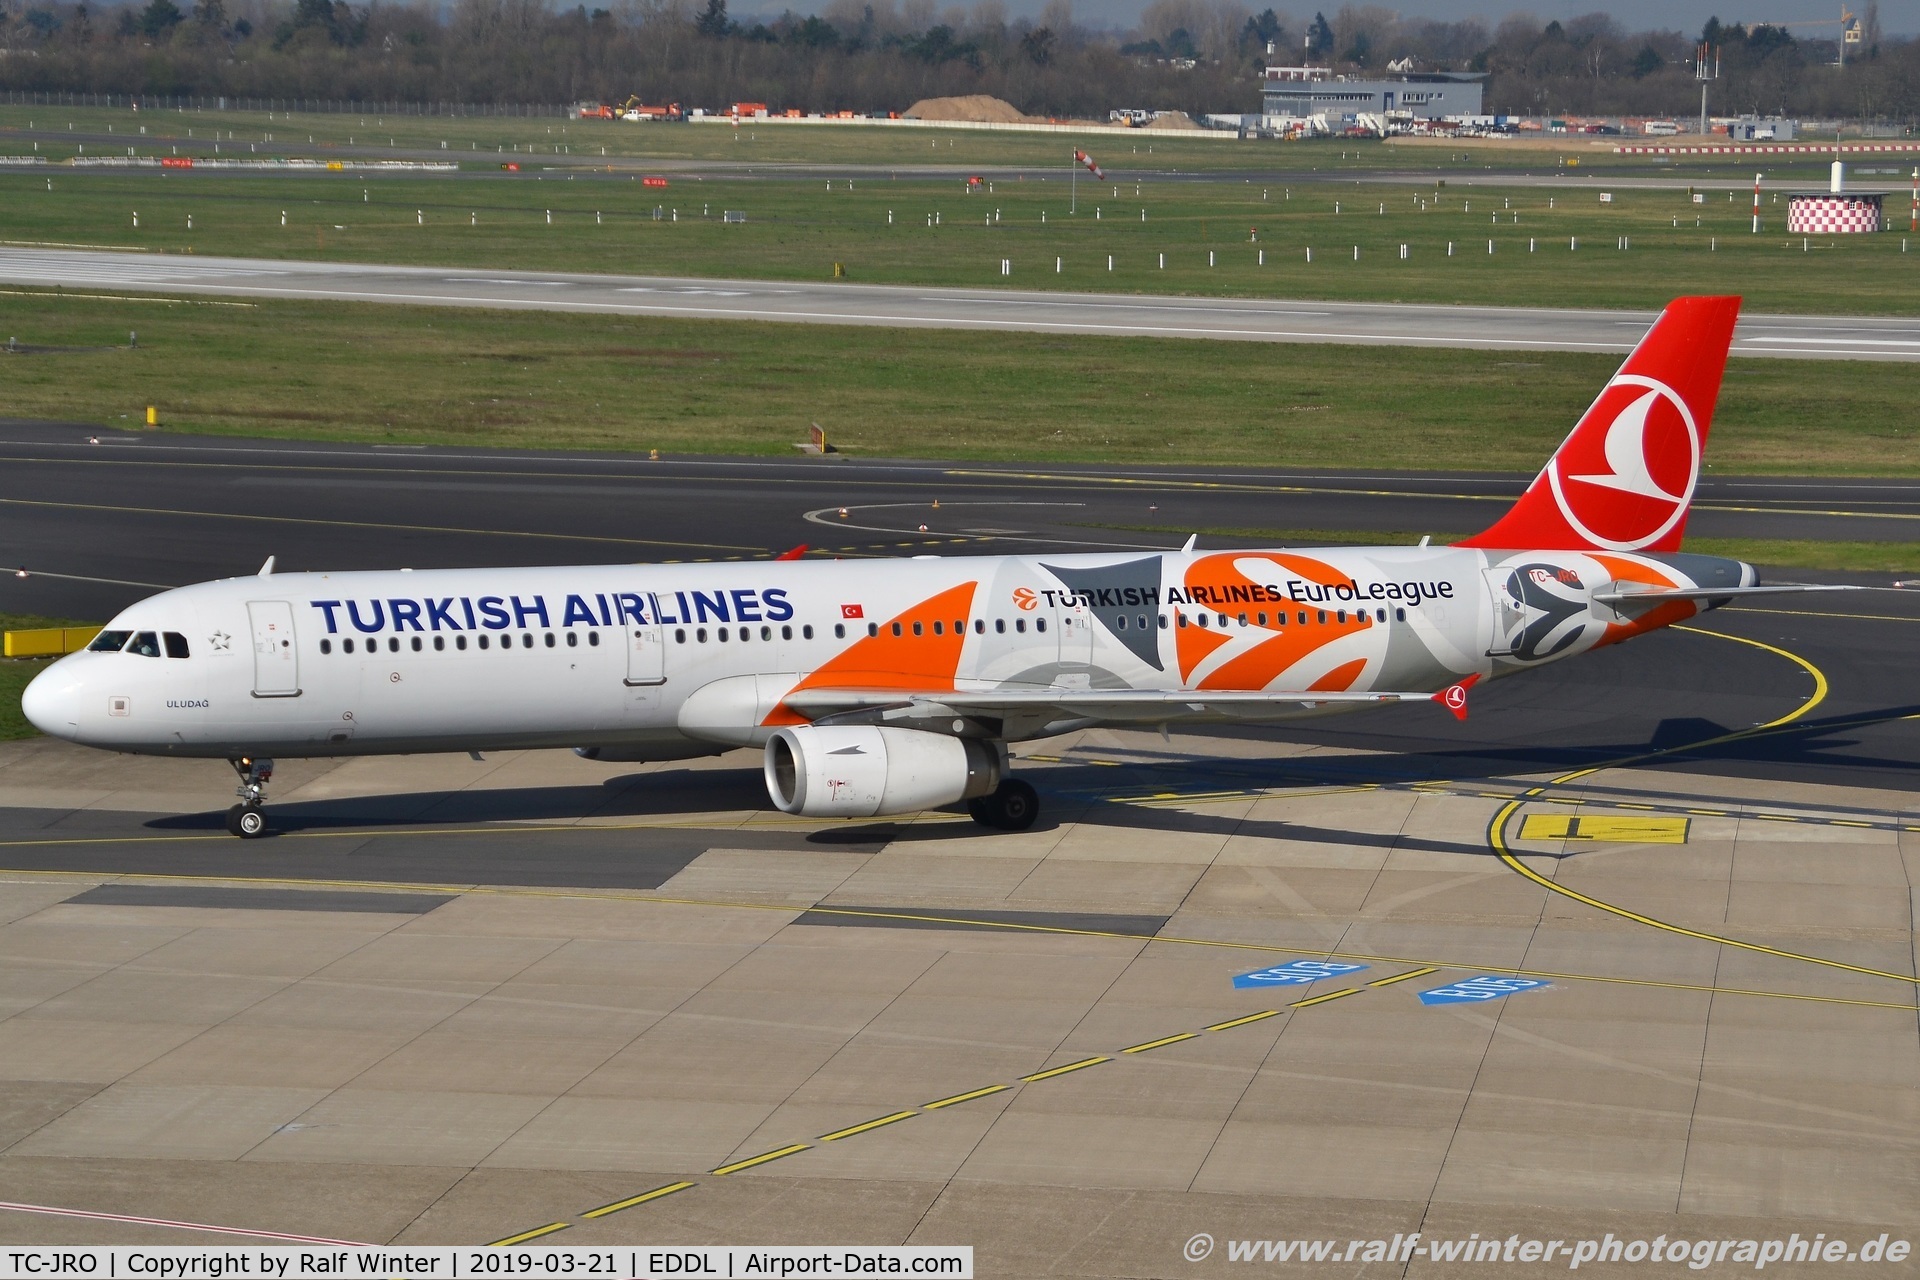 TC-JRO, 2011 Airbus A321-231 C/N 4682, Airbus A321-231 - TK THY Turkish Airlines 'Uludag' 'EuroLeague Livery' - 4682 - TC-JRO - 21.03.2019 - DUS